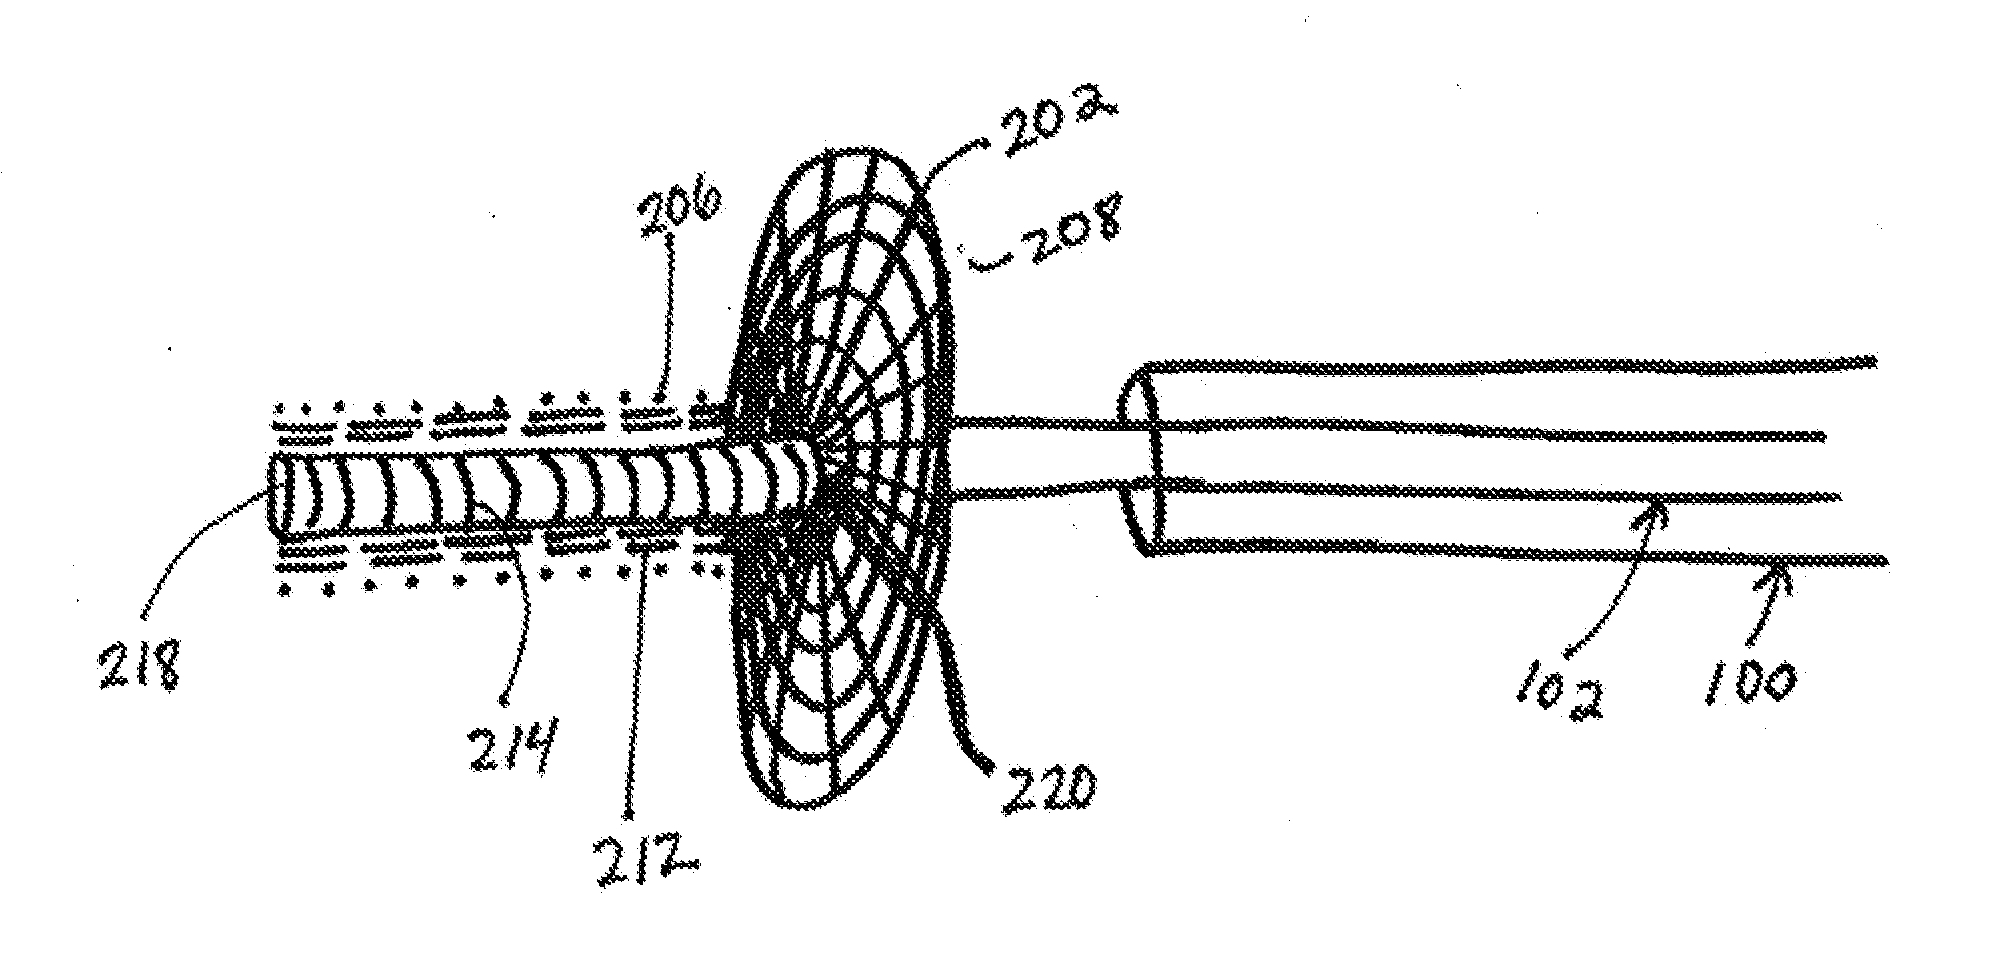 Aneurysm cover device for embolic delivery and retention